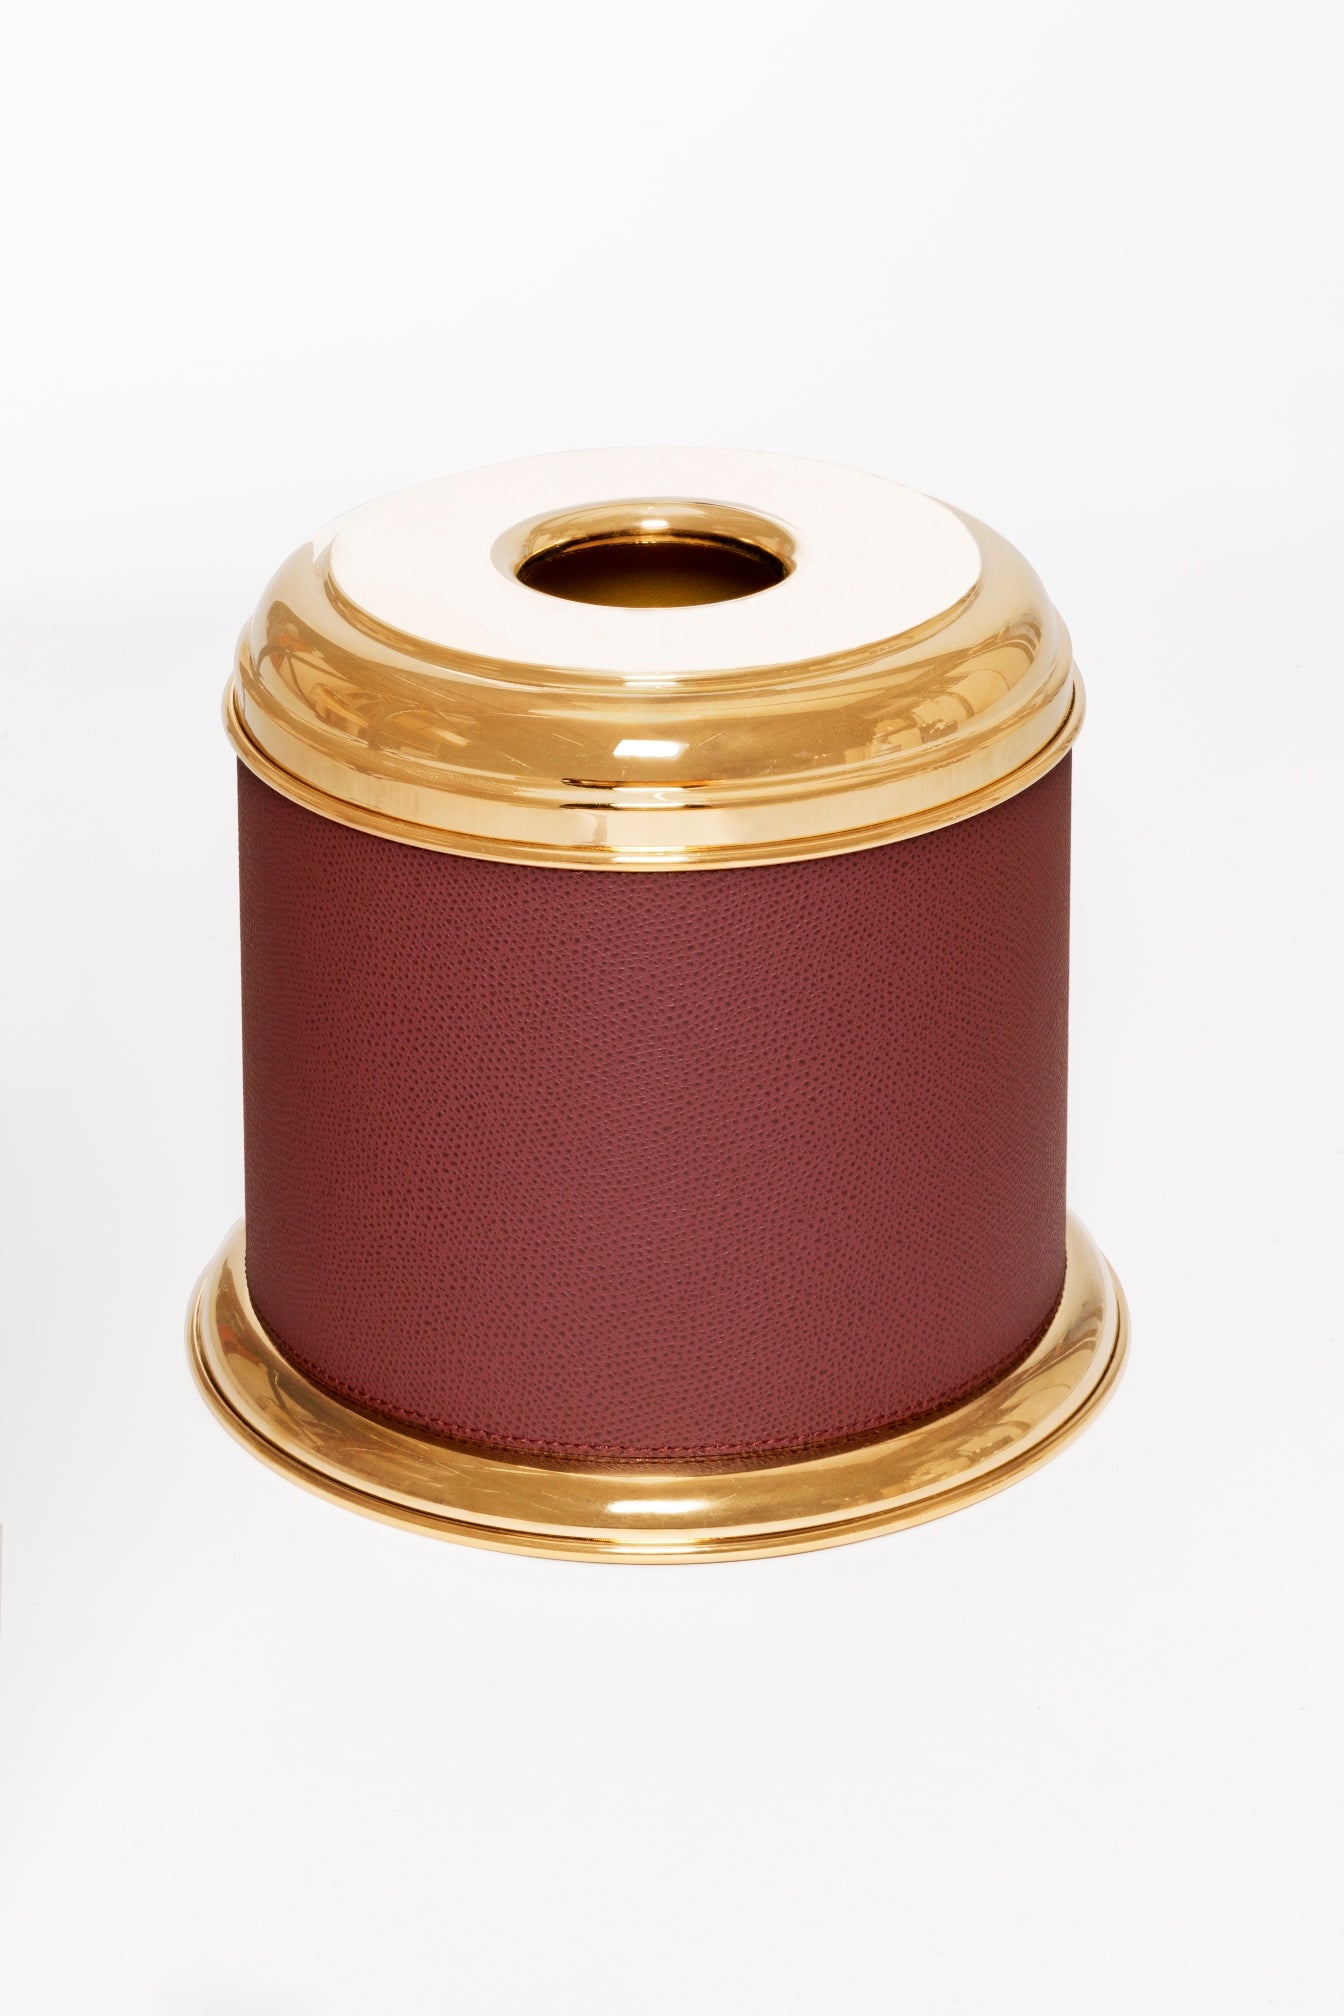 Giobagnara Dubai Round Leather-Covered Metal Tissue Holder | Part of Dubai Bathroom Collection | Luxurious Bath Accessories | Crafted with Fine Leather-Covered Metal Structure | Elegant and Functional Design | Explore the Dubai Bathroom Collection at 2Jour Concierge, #1 luxury high-end gift & lifestyle shop